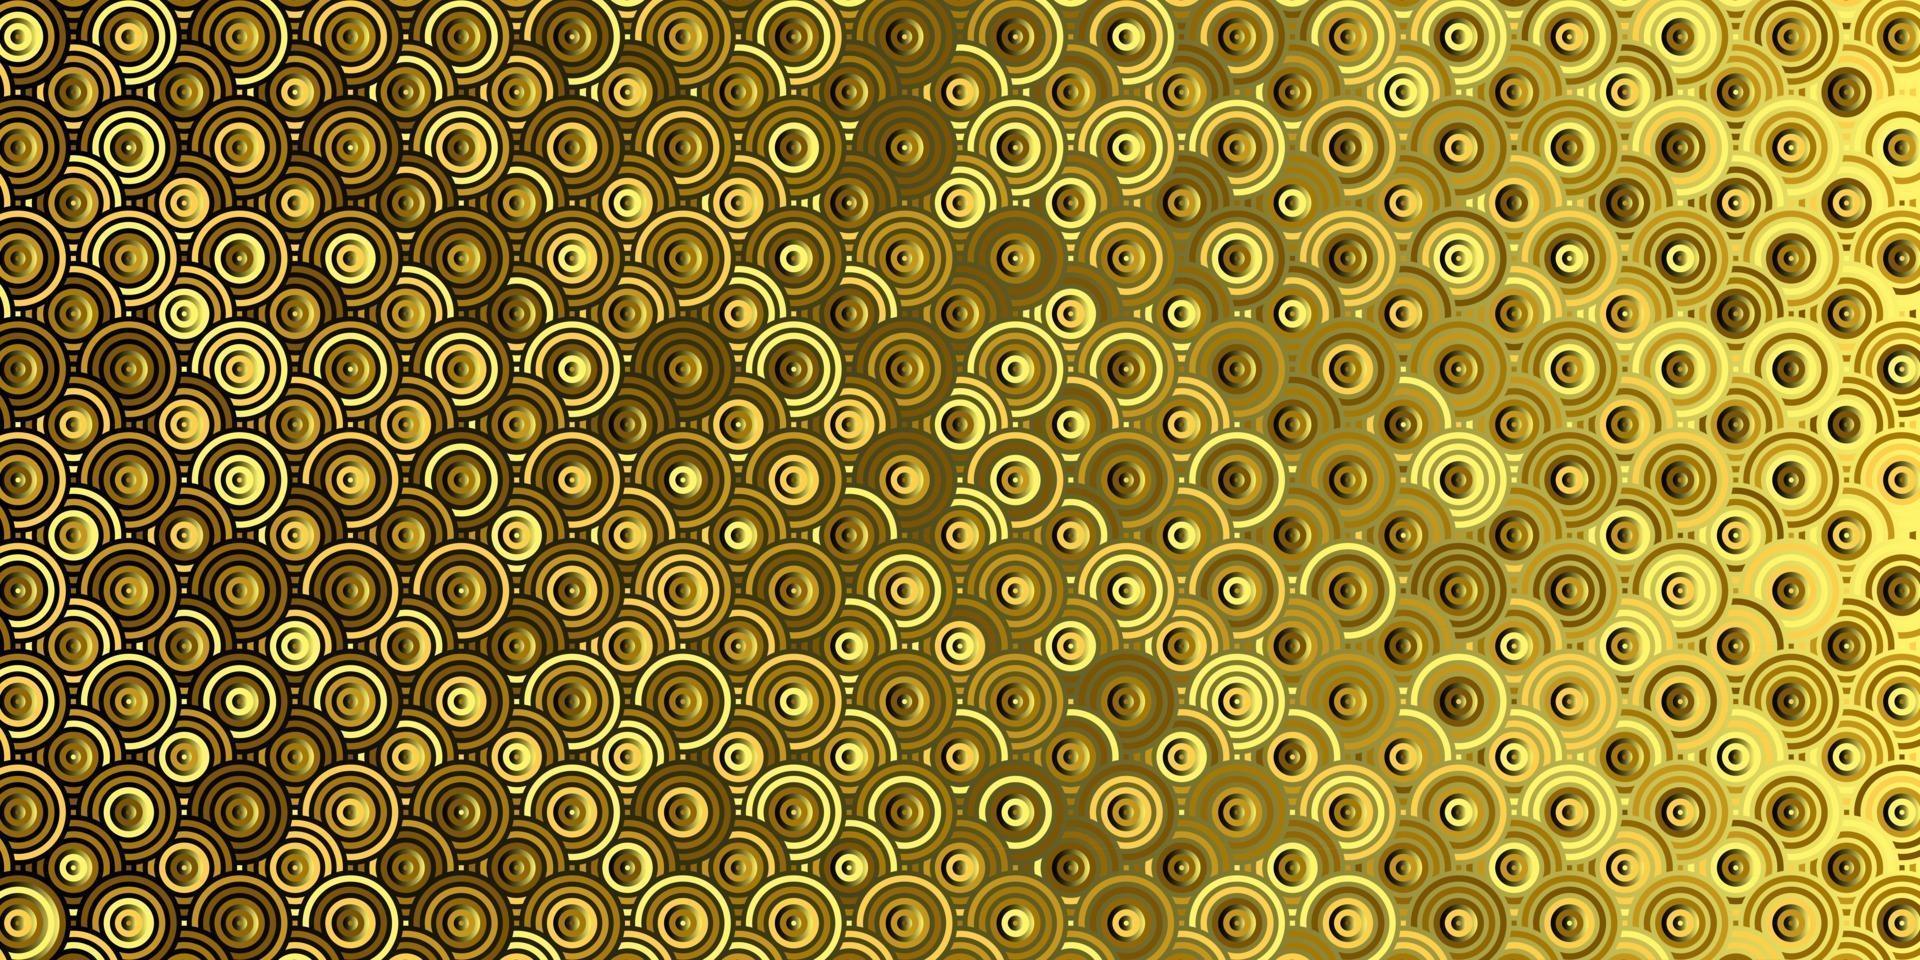 Abstract geometric pattern circles overlapping traditional gold background vector